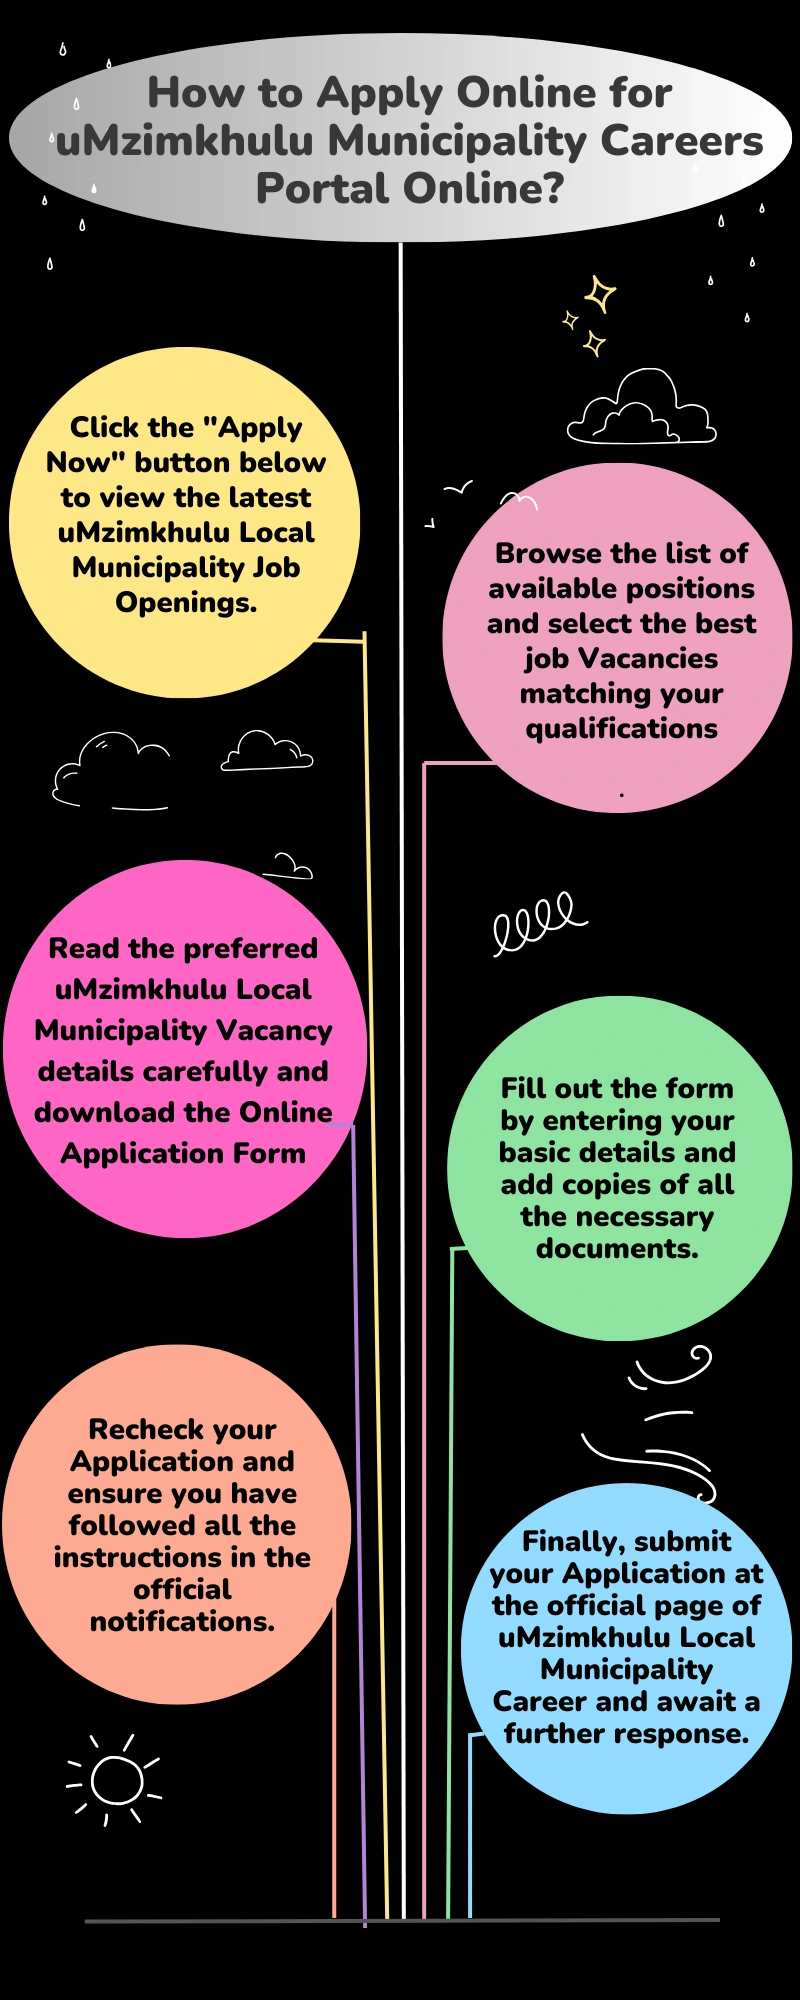 How to Apply Online for uMzimkhulu Municipality Careers Portal Online?